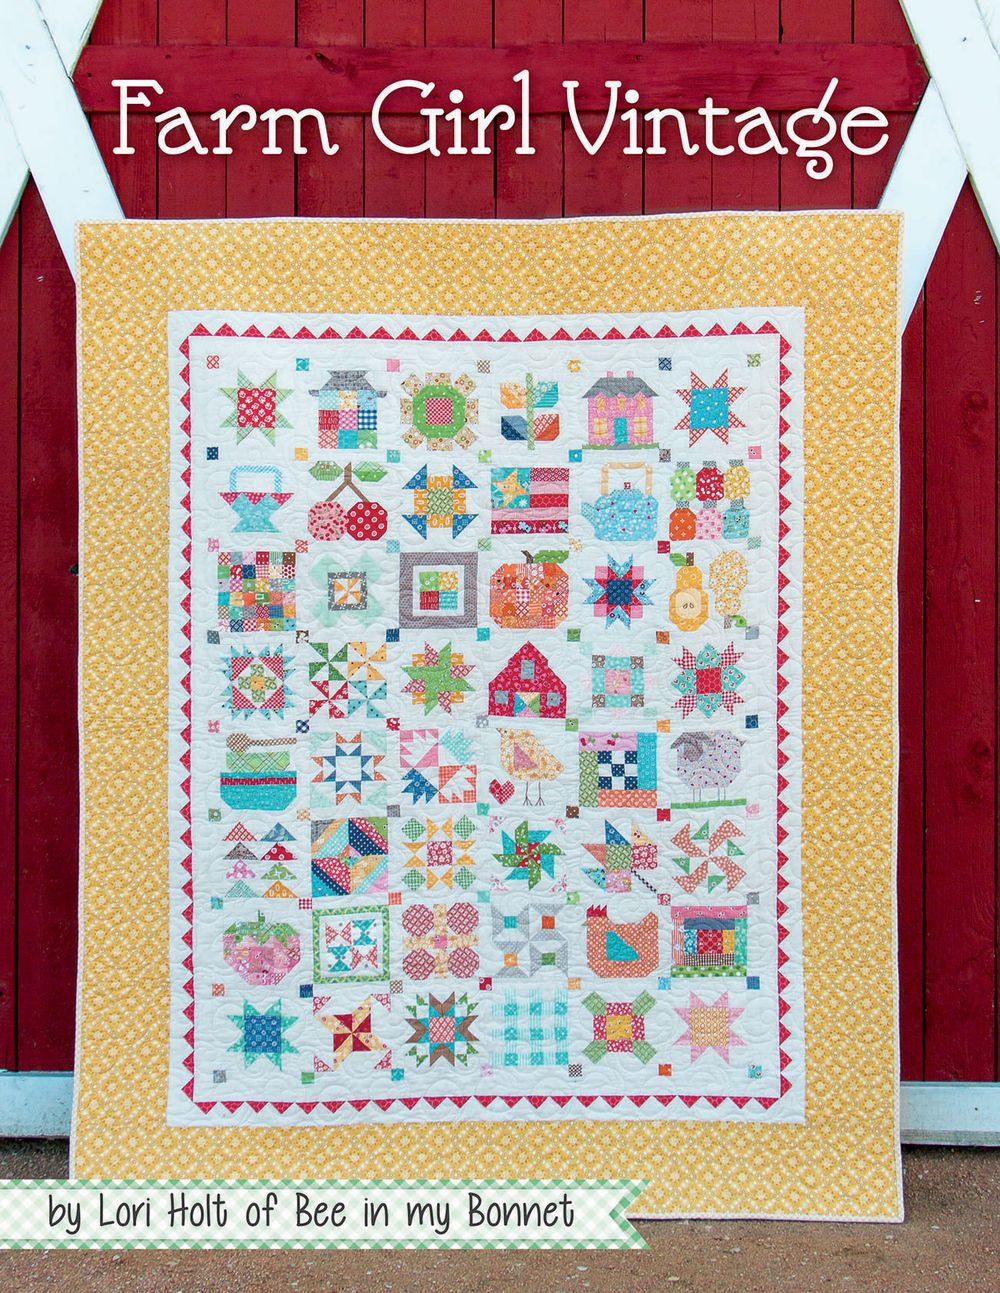 Farm Girl Vintage Quilt Pattern Book by Lori Holt for It's Sew Emma